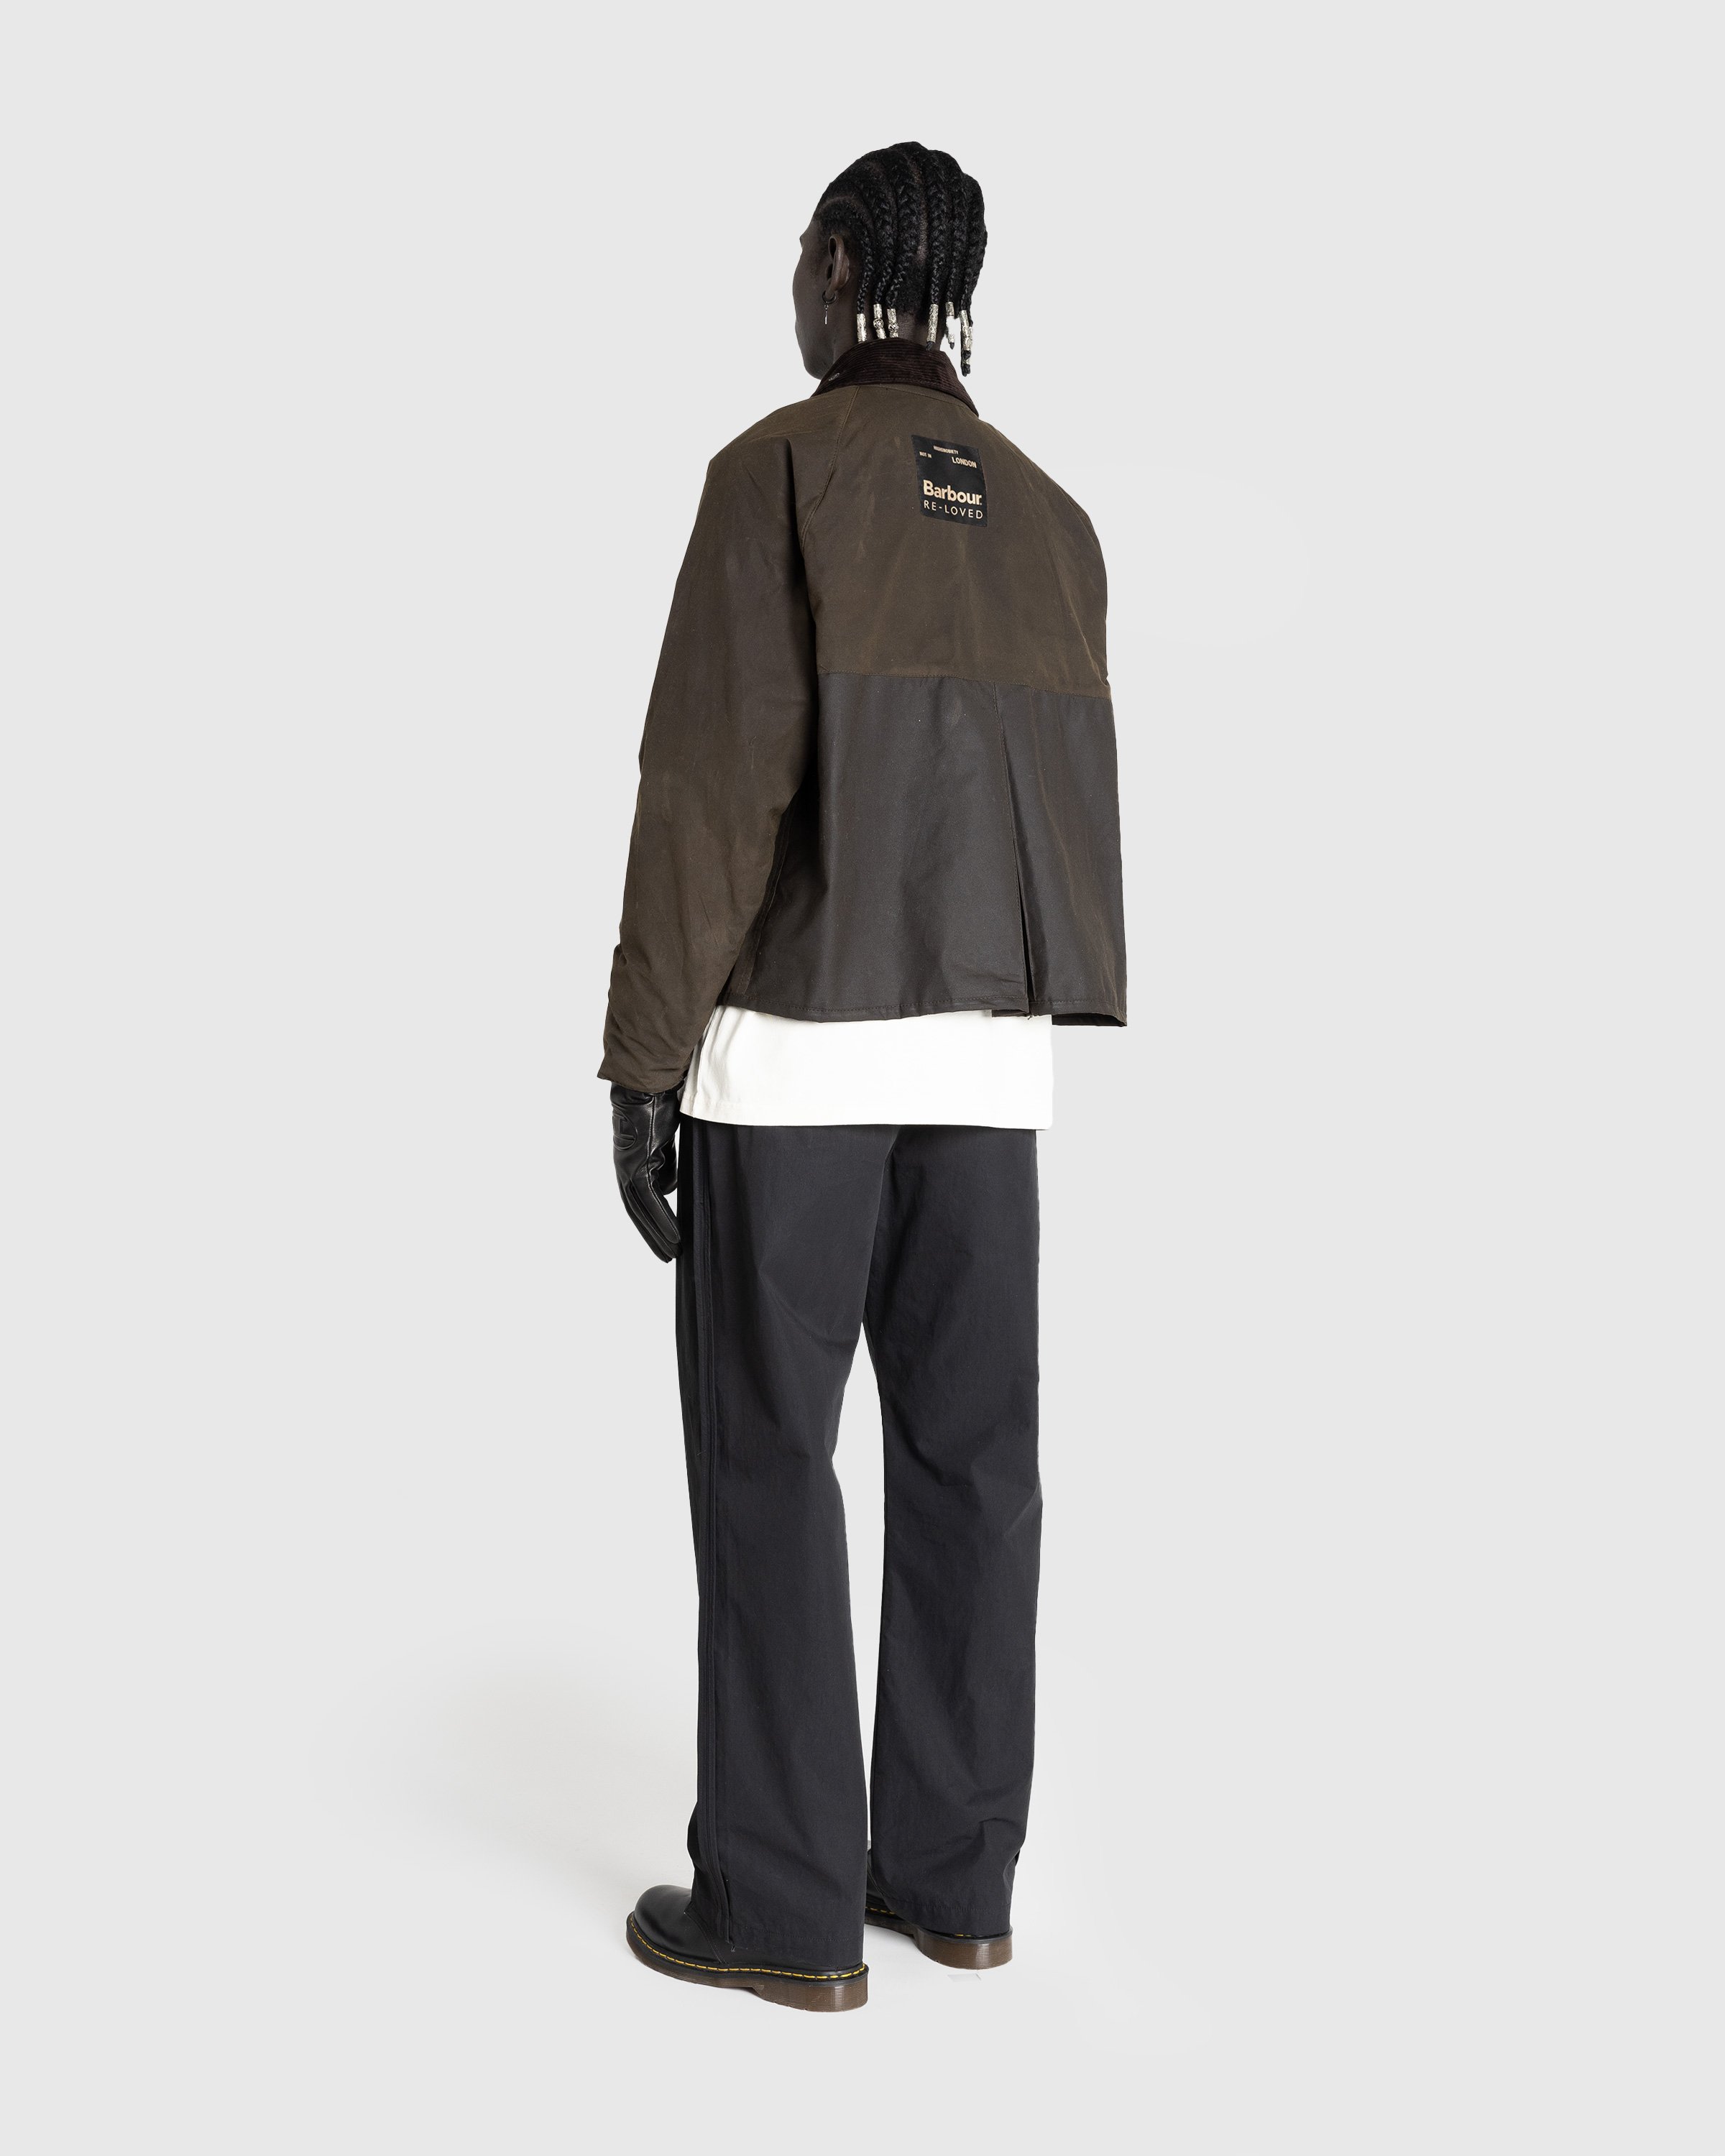 Barbour x Highsnobiety - Re-Loved Cropped Bedale Jacket 1 - 36 - Grey-Black - Clothing -  - Image 8